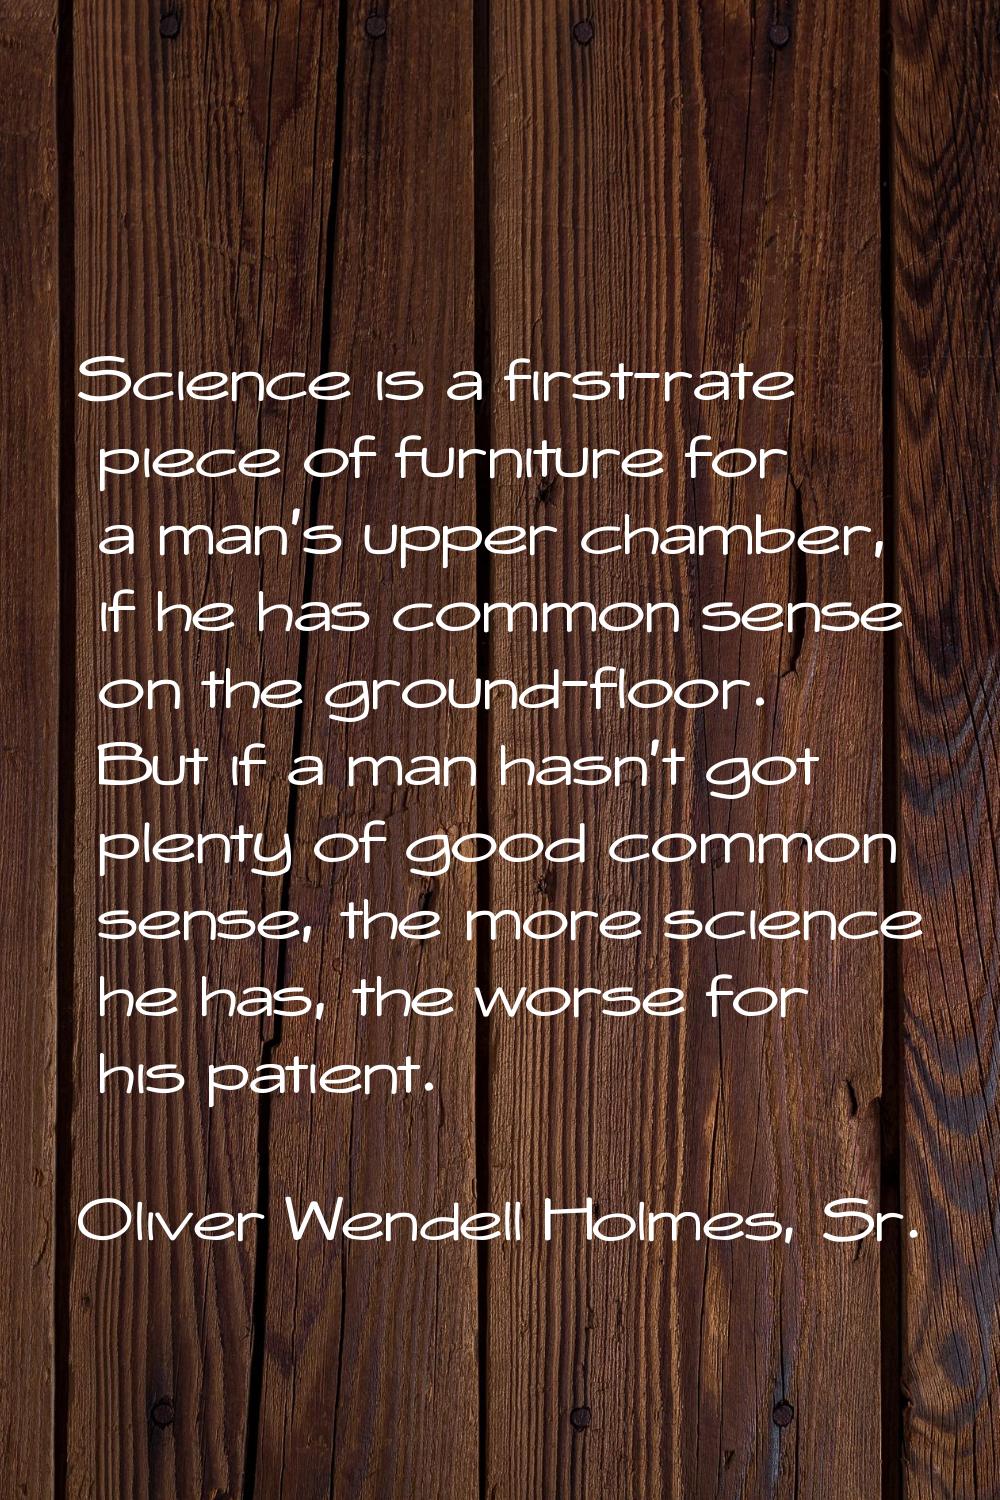 Science is a first-rate piece of furniture for a man's upper chamber, if he has common sense on the